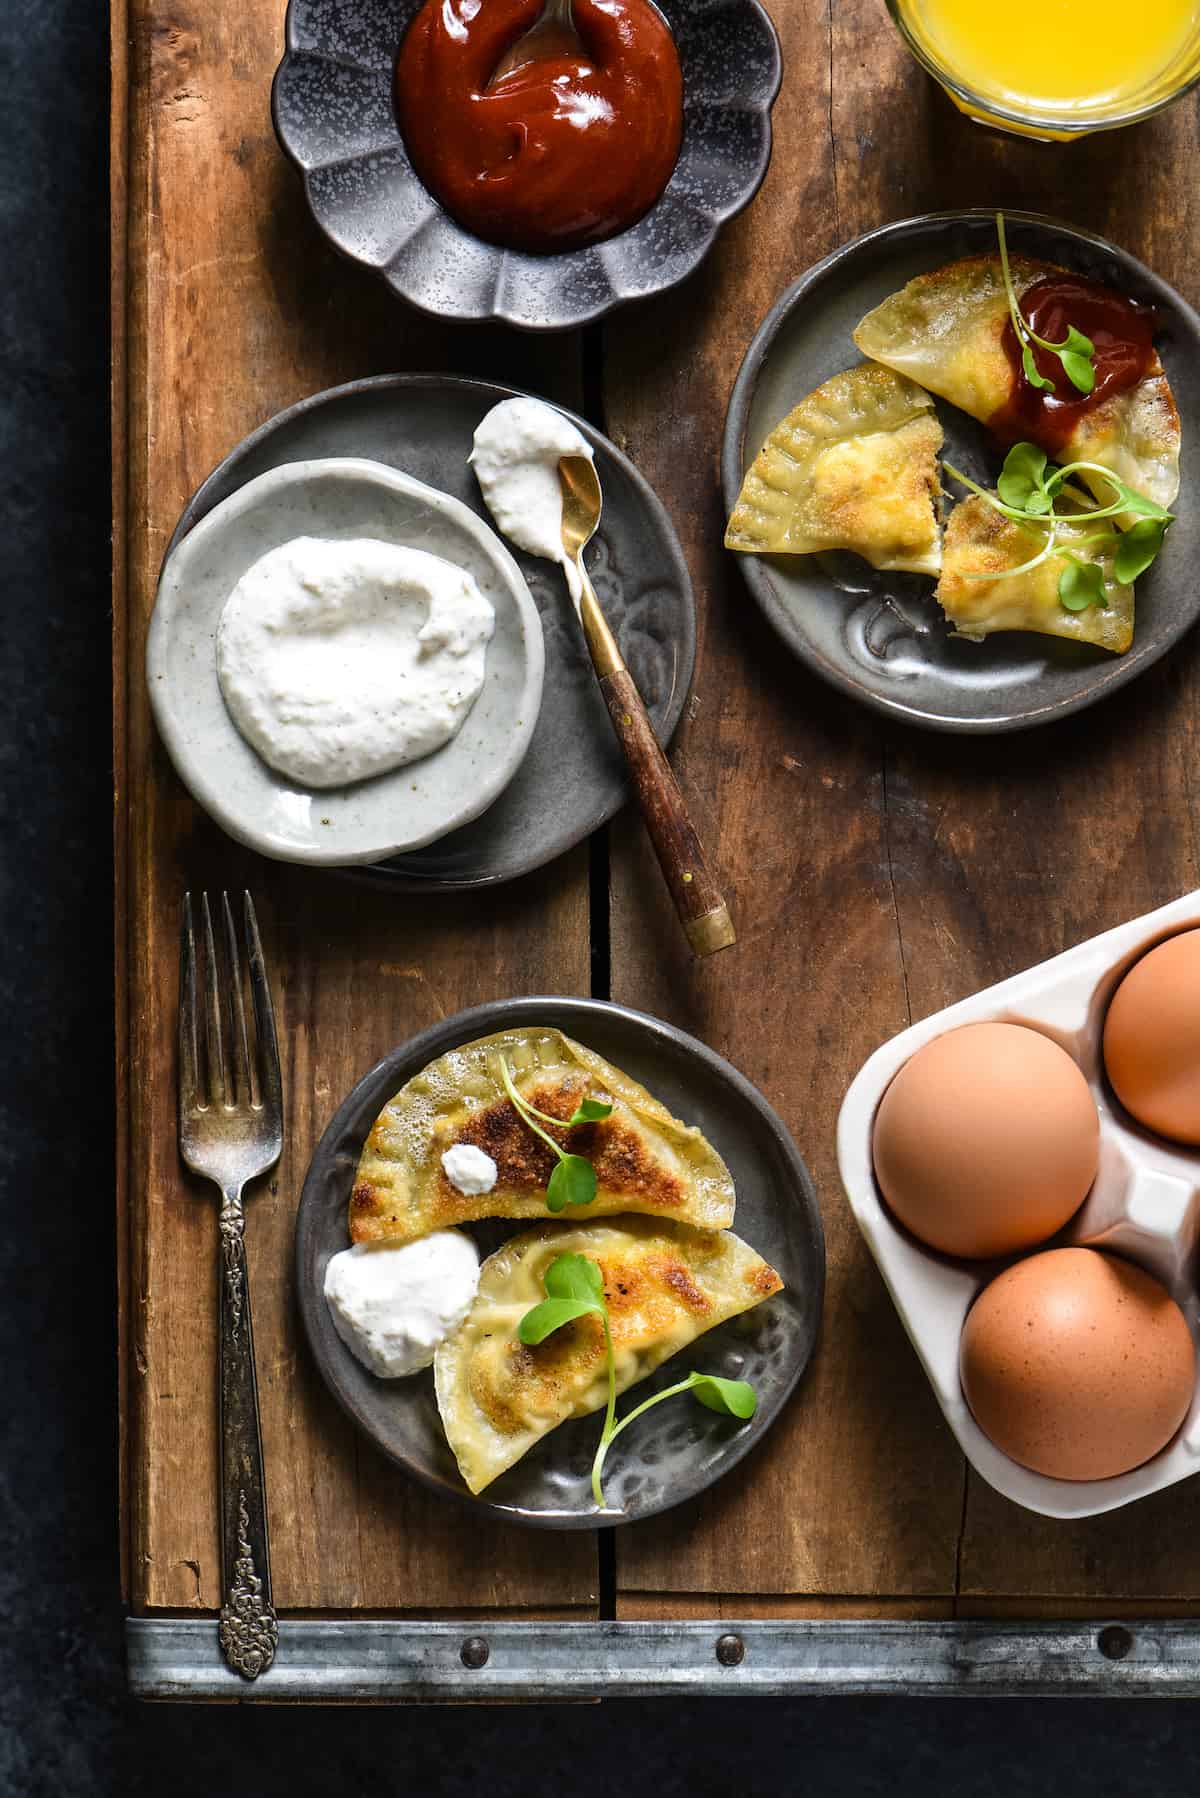 Lazy Sunday Breakfast Dumplings - Make brunch fun again with these sausage, egg and cheese wontons served with two easy dipping sauces. | foxeslovelemons.com